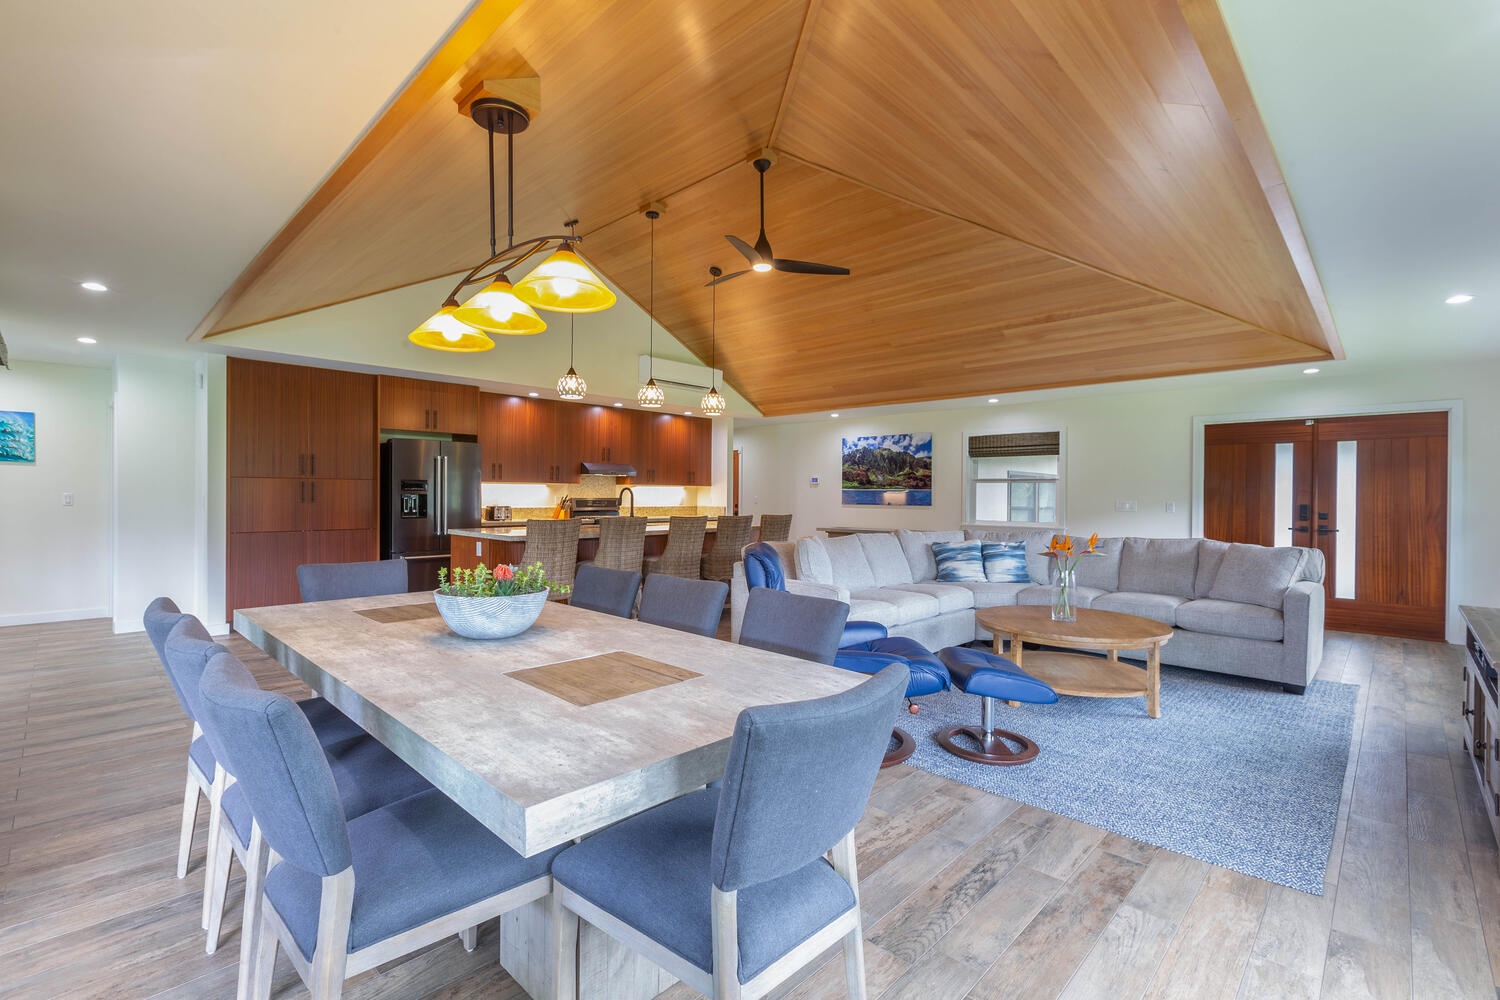 Princeville Vacation Rentals, Aloha Villa - Large dining area for the whole group